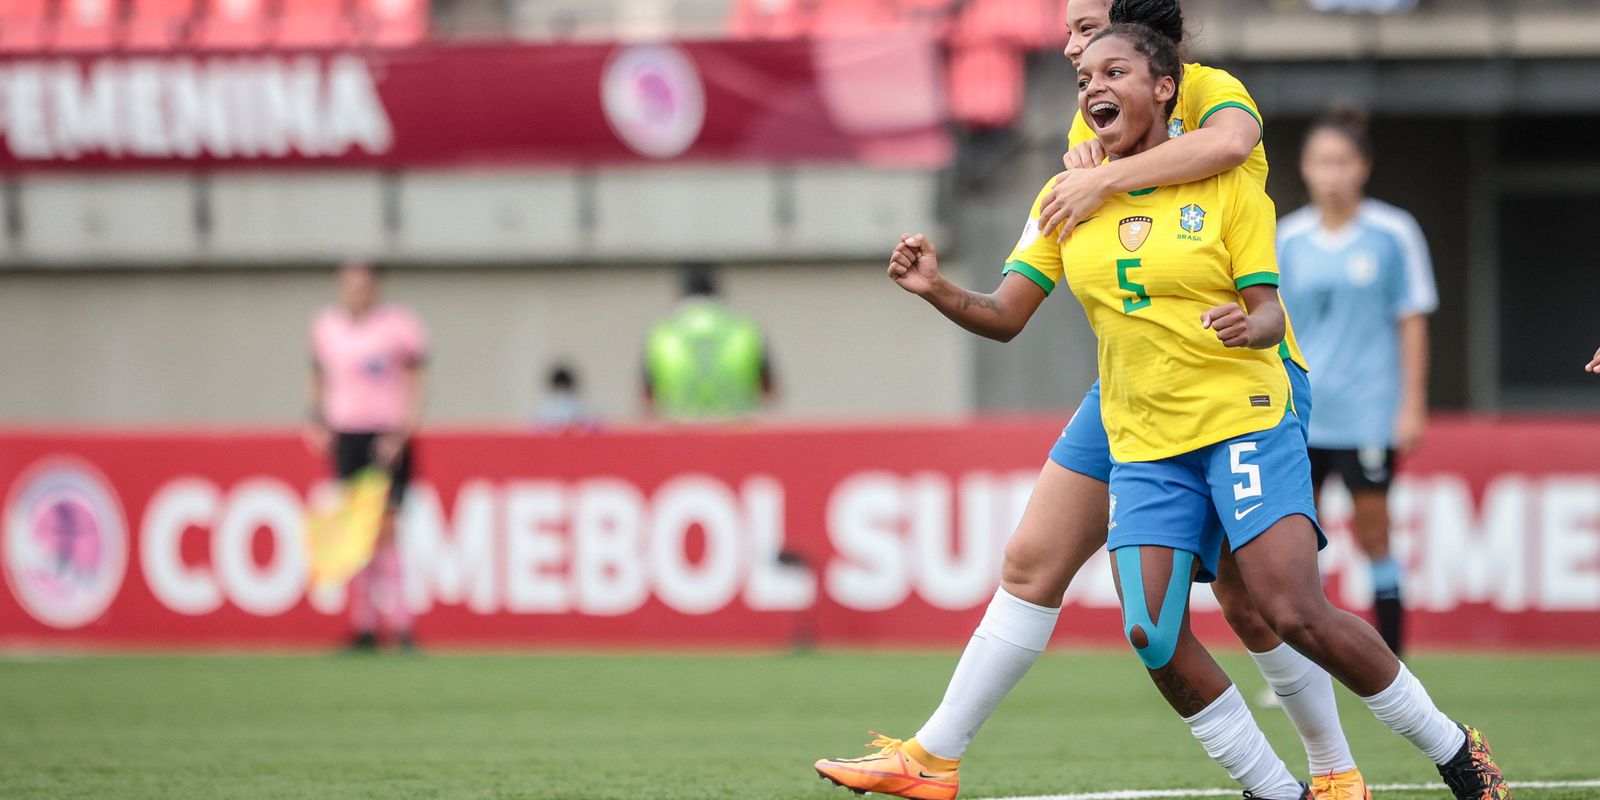 Brazil beats Uruguay 1-0 in the Women's Under-20 South American Championship